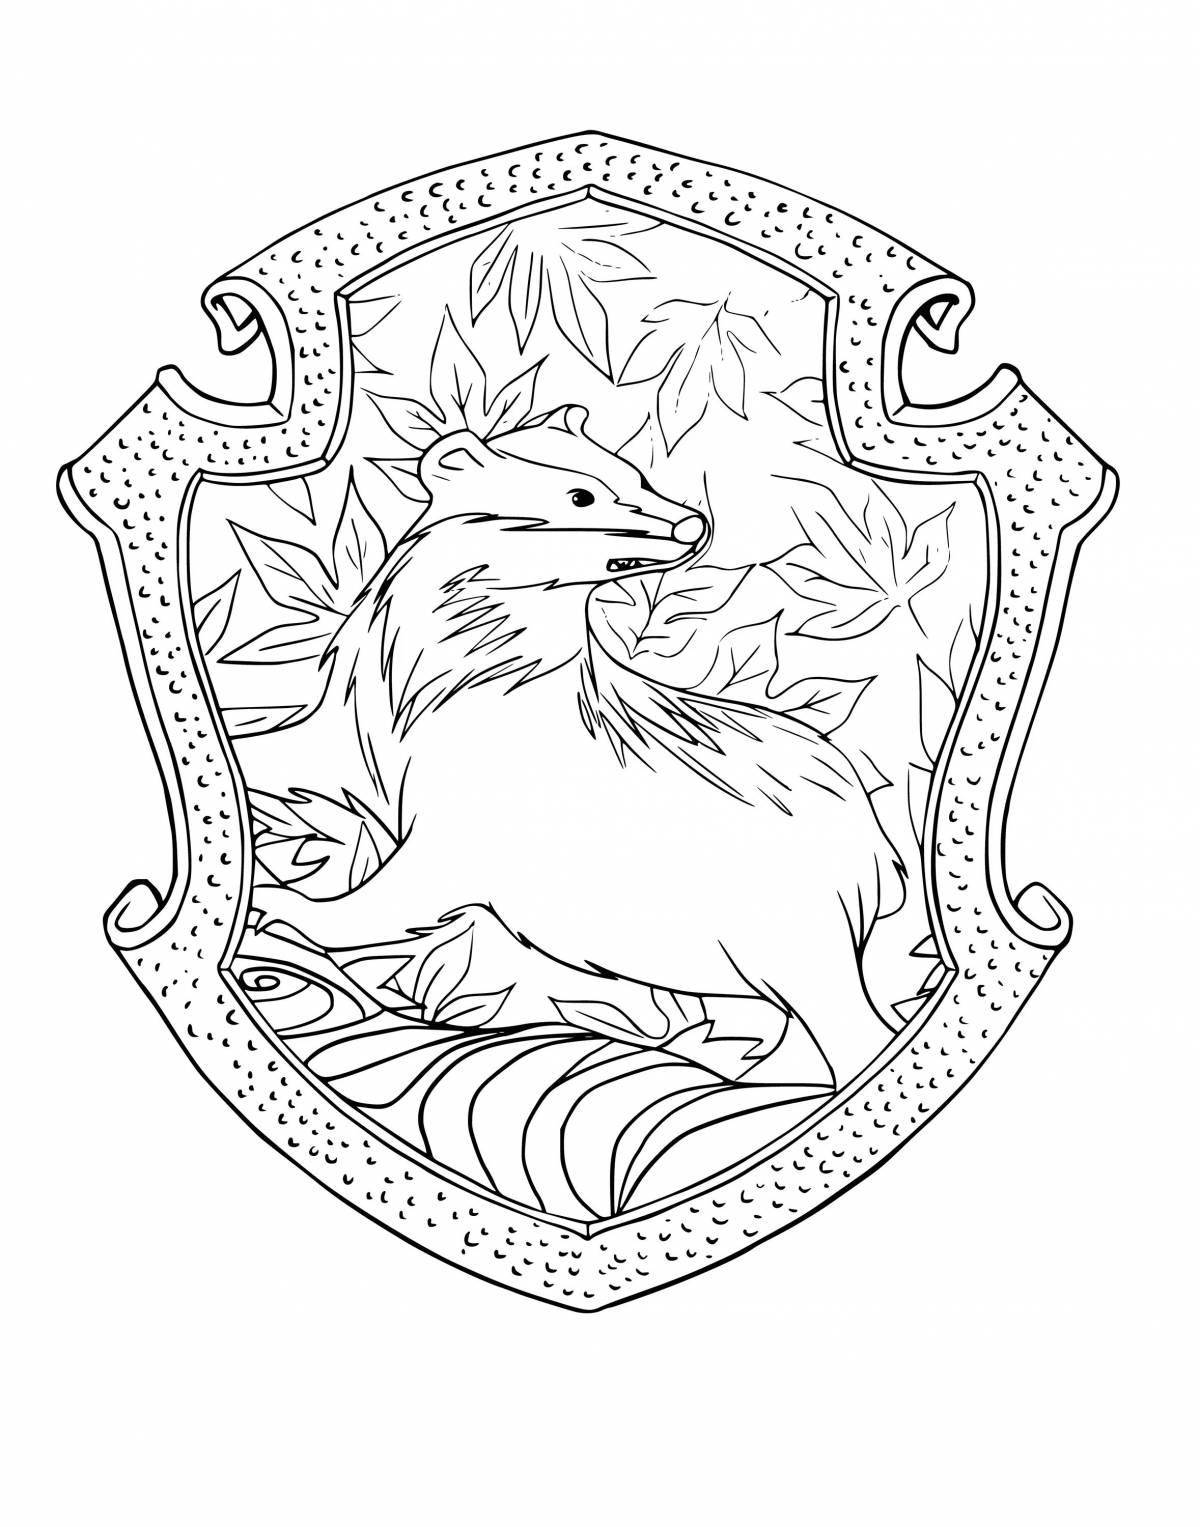 Coloring page embellished slytherin coat of arms